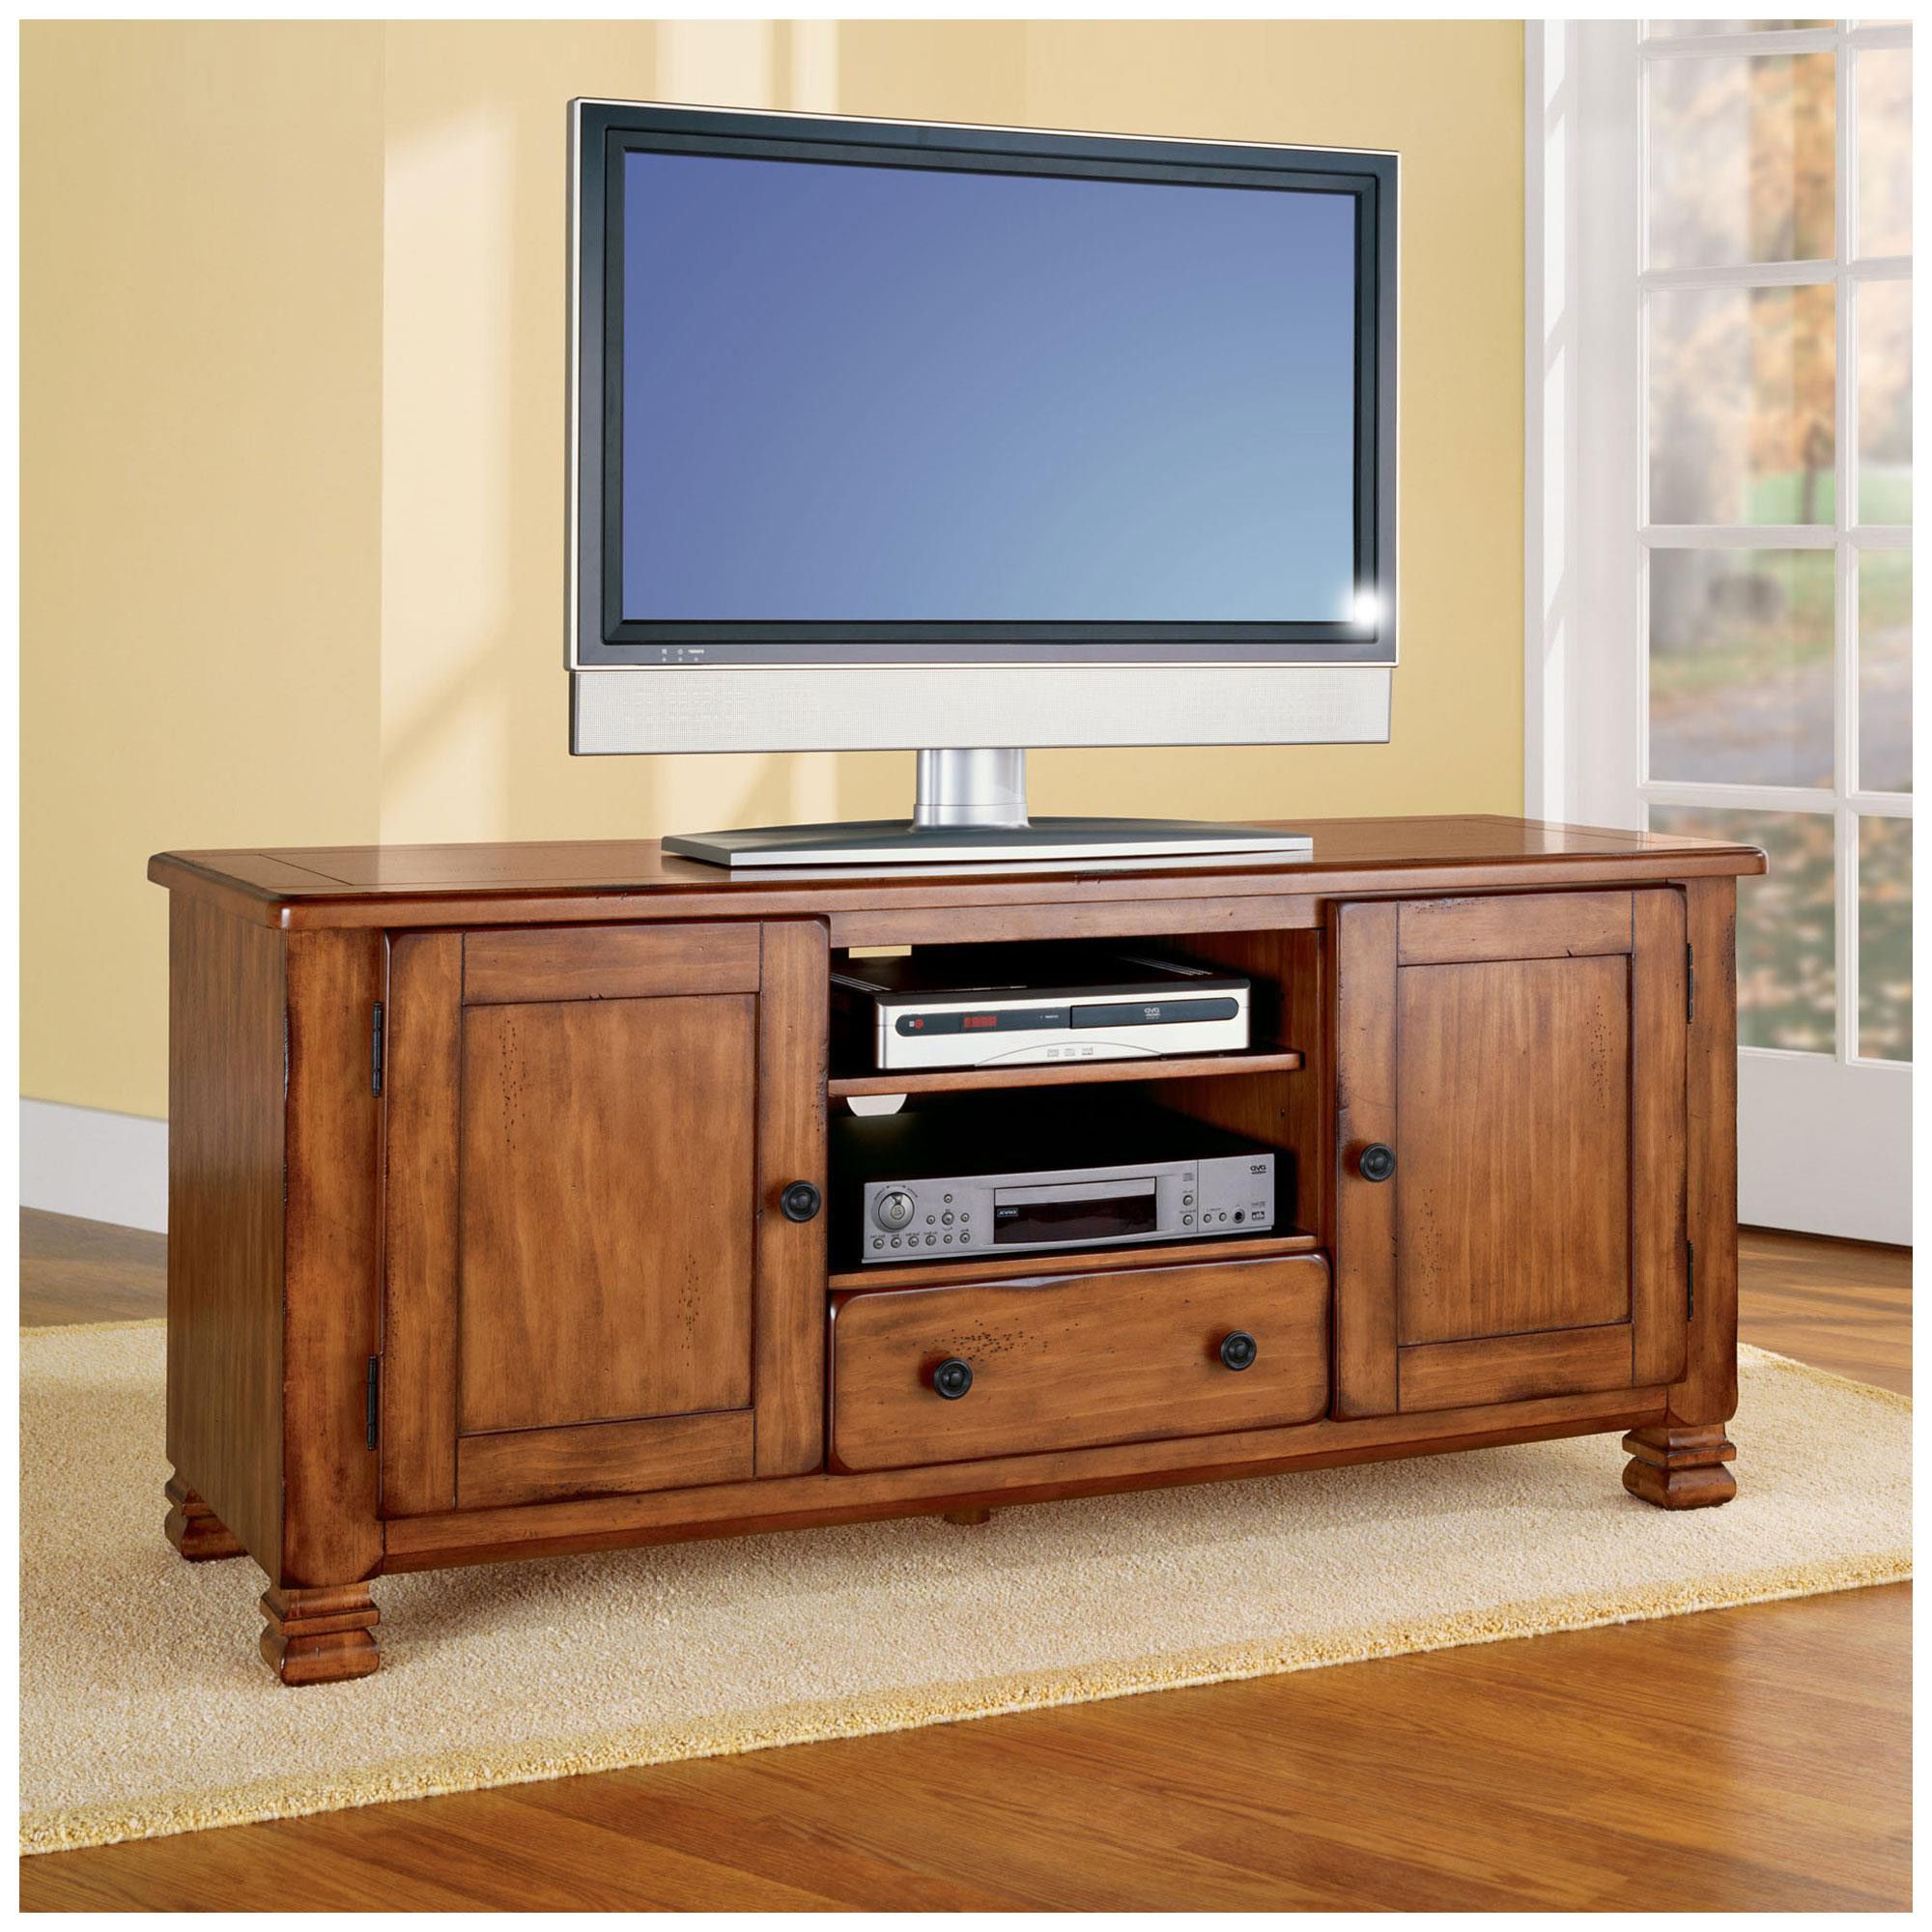 Oak Tv Stand Walmart Solid Wood Stands For Flat Screens Light Inside Well Known Honey Oak Tv Stands (View 1 of 20)